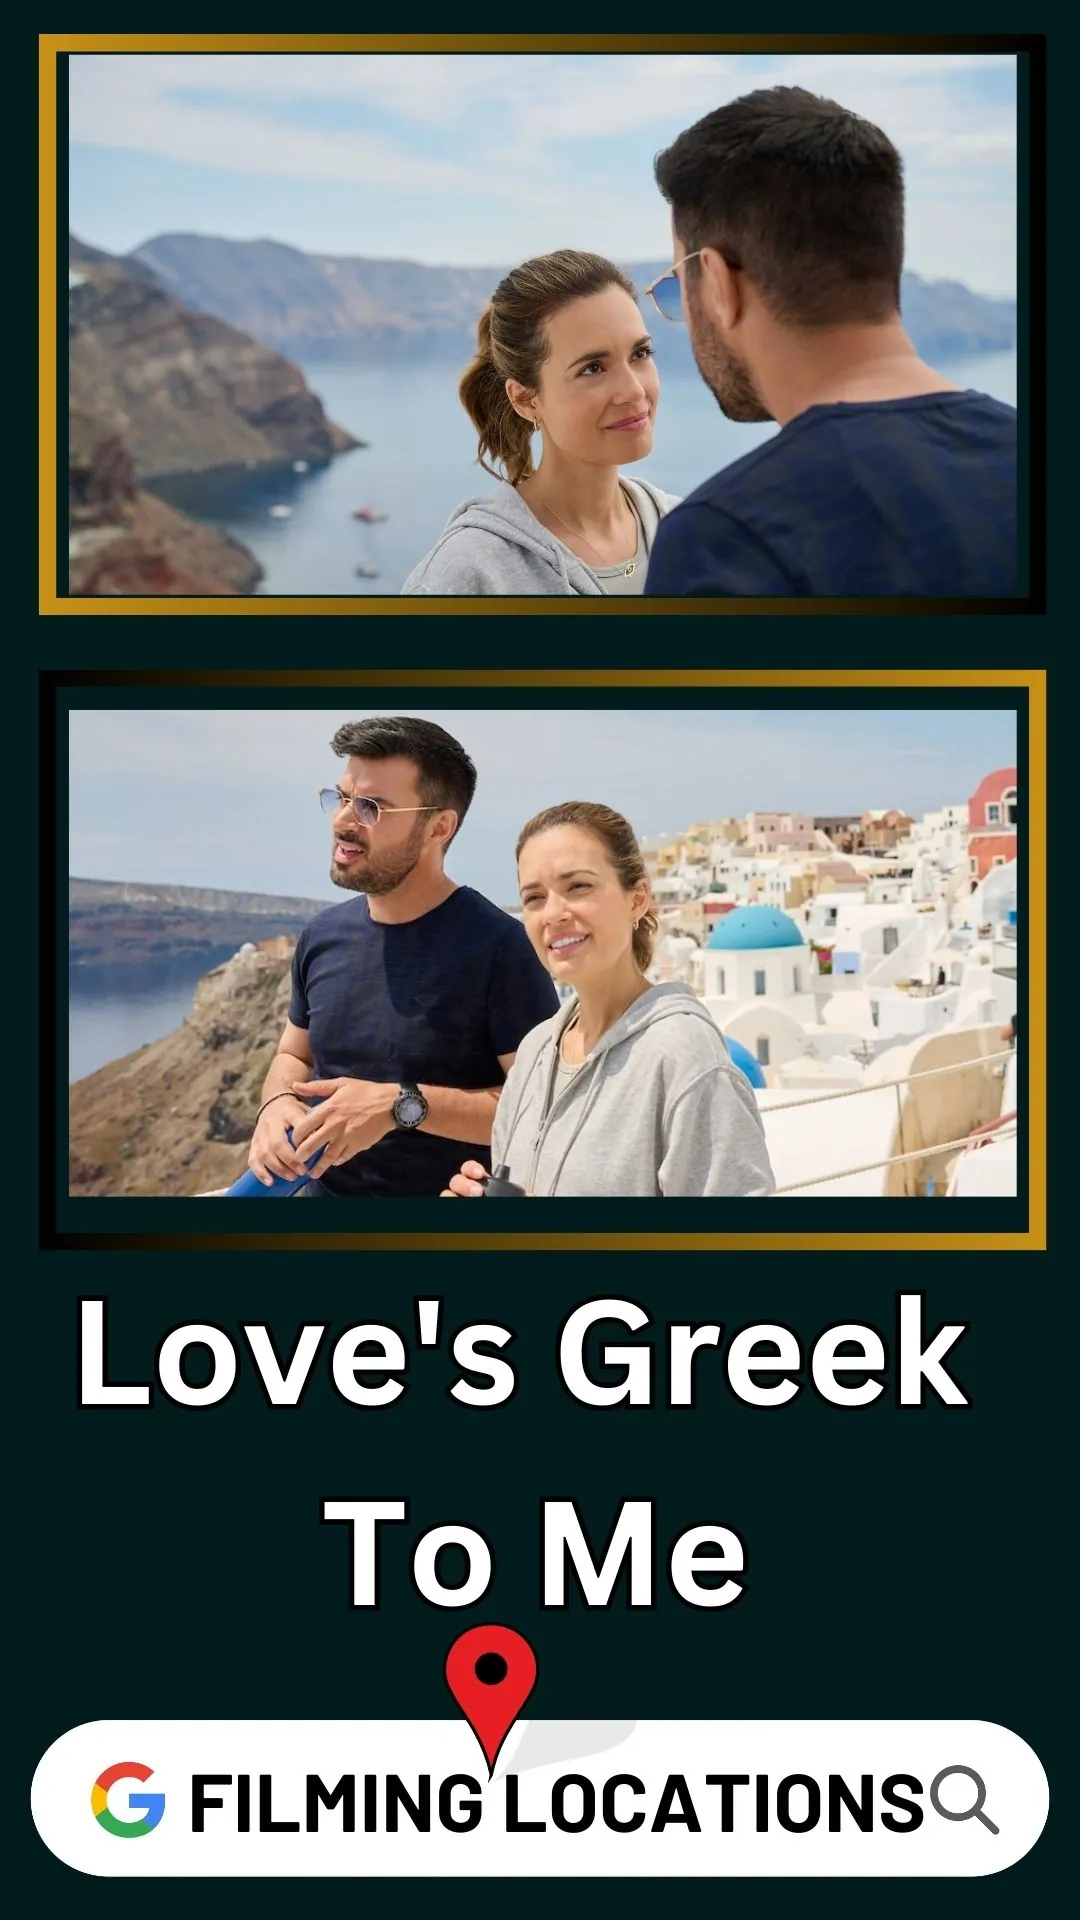 Love's Greek to Me Filming Location